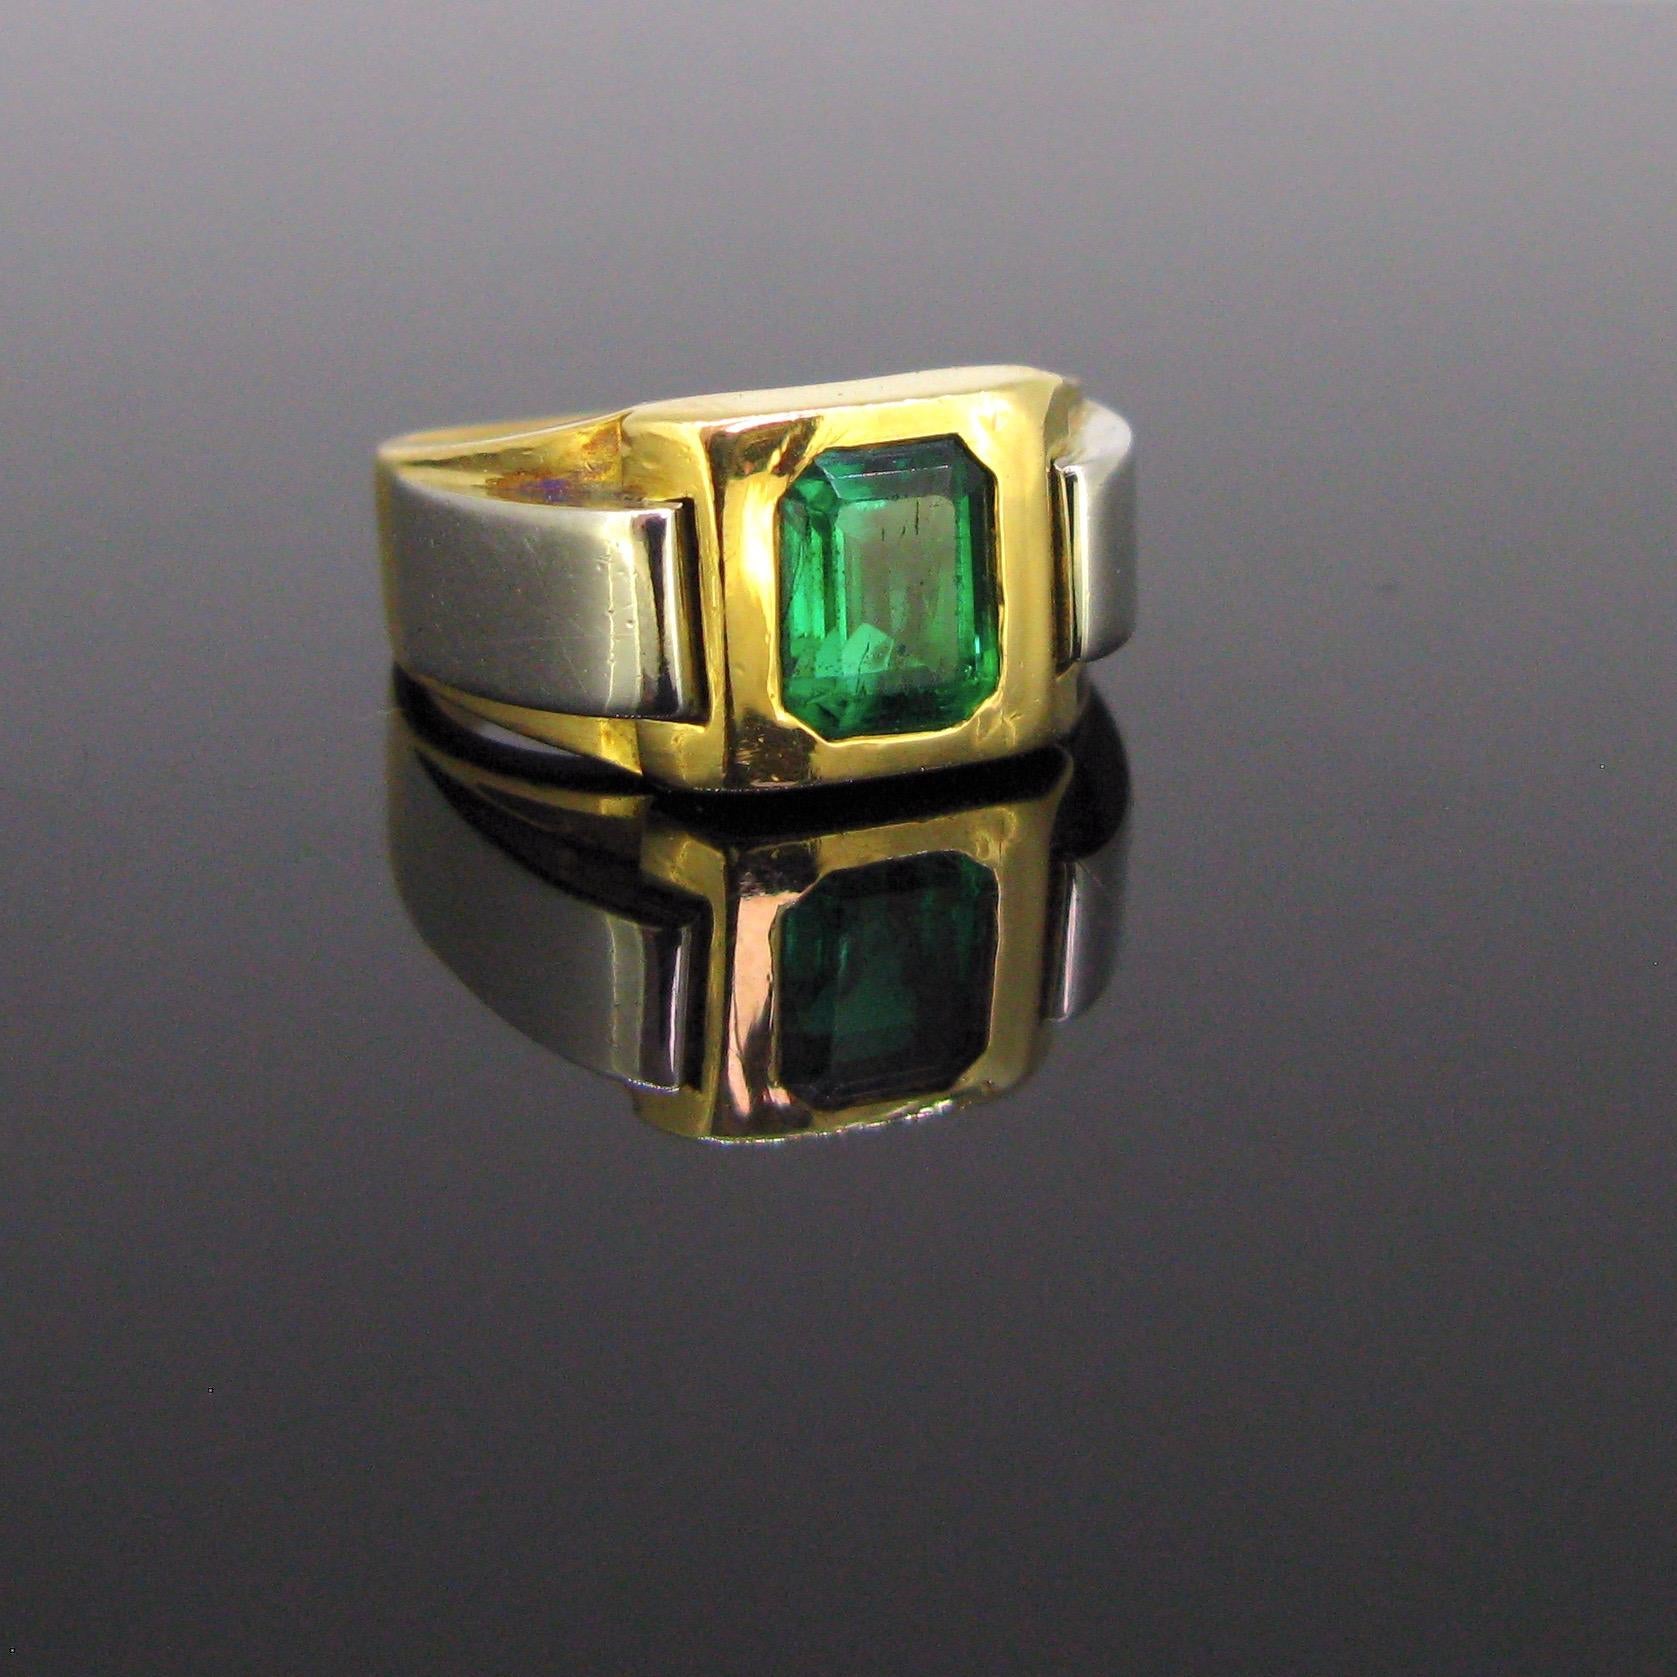 This ring has a beautiful geometric design. It is set with a vibrant deep green emerald weighing around 1.4ct. It has been tested by the GCS lab - the emerald is from Afghanistan and has indication of moderate clarity enhancement. The shoulders of